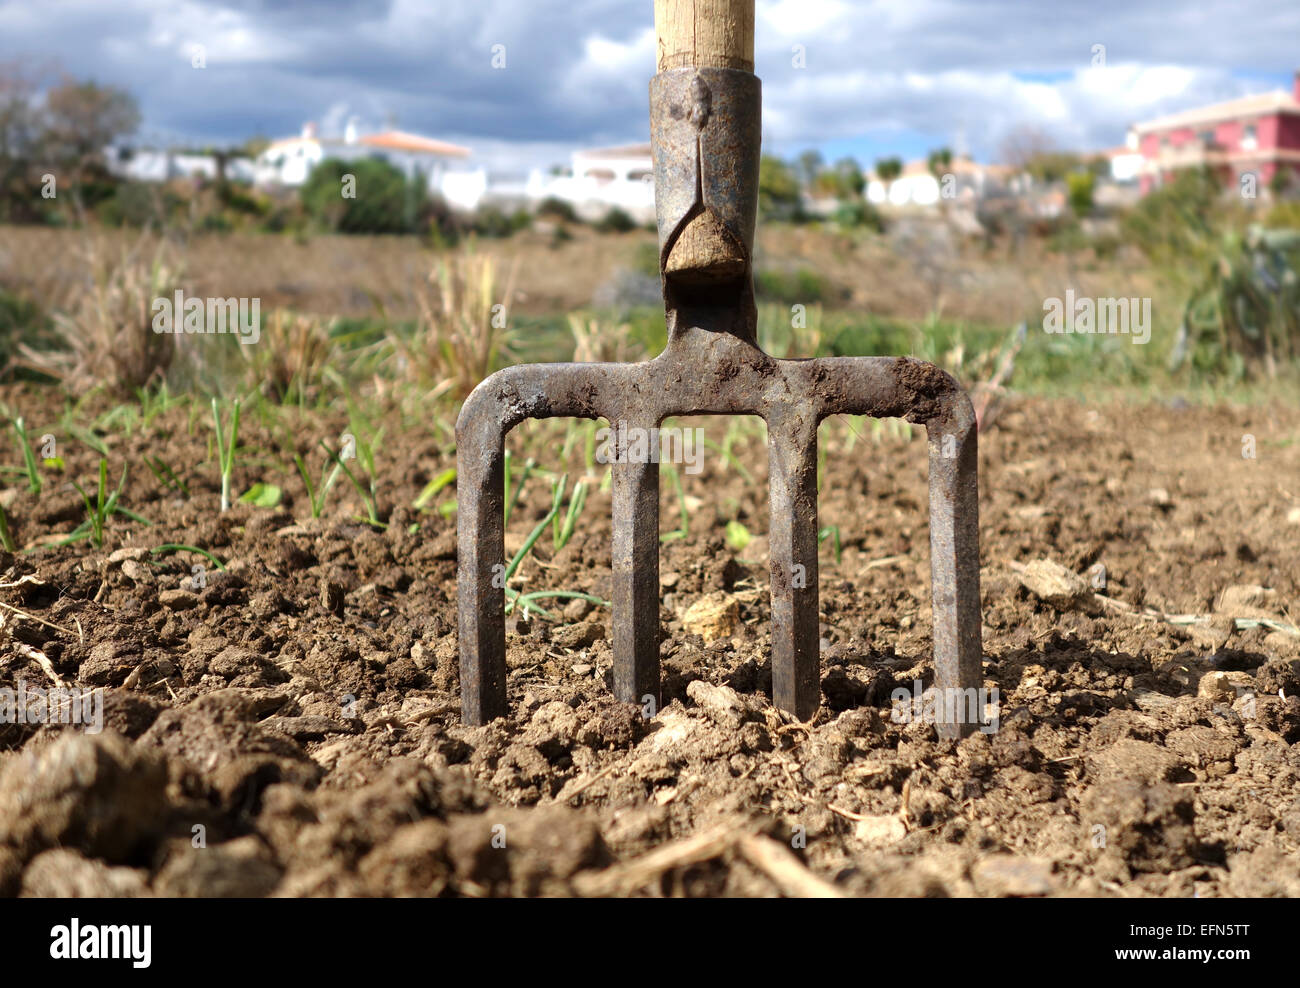 Forged spading fork in fertile soil, onion bed behind, Southern Spain. Stock Photo